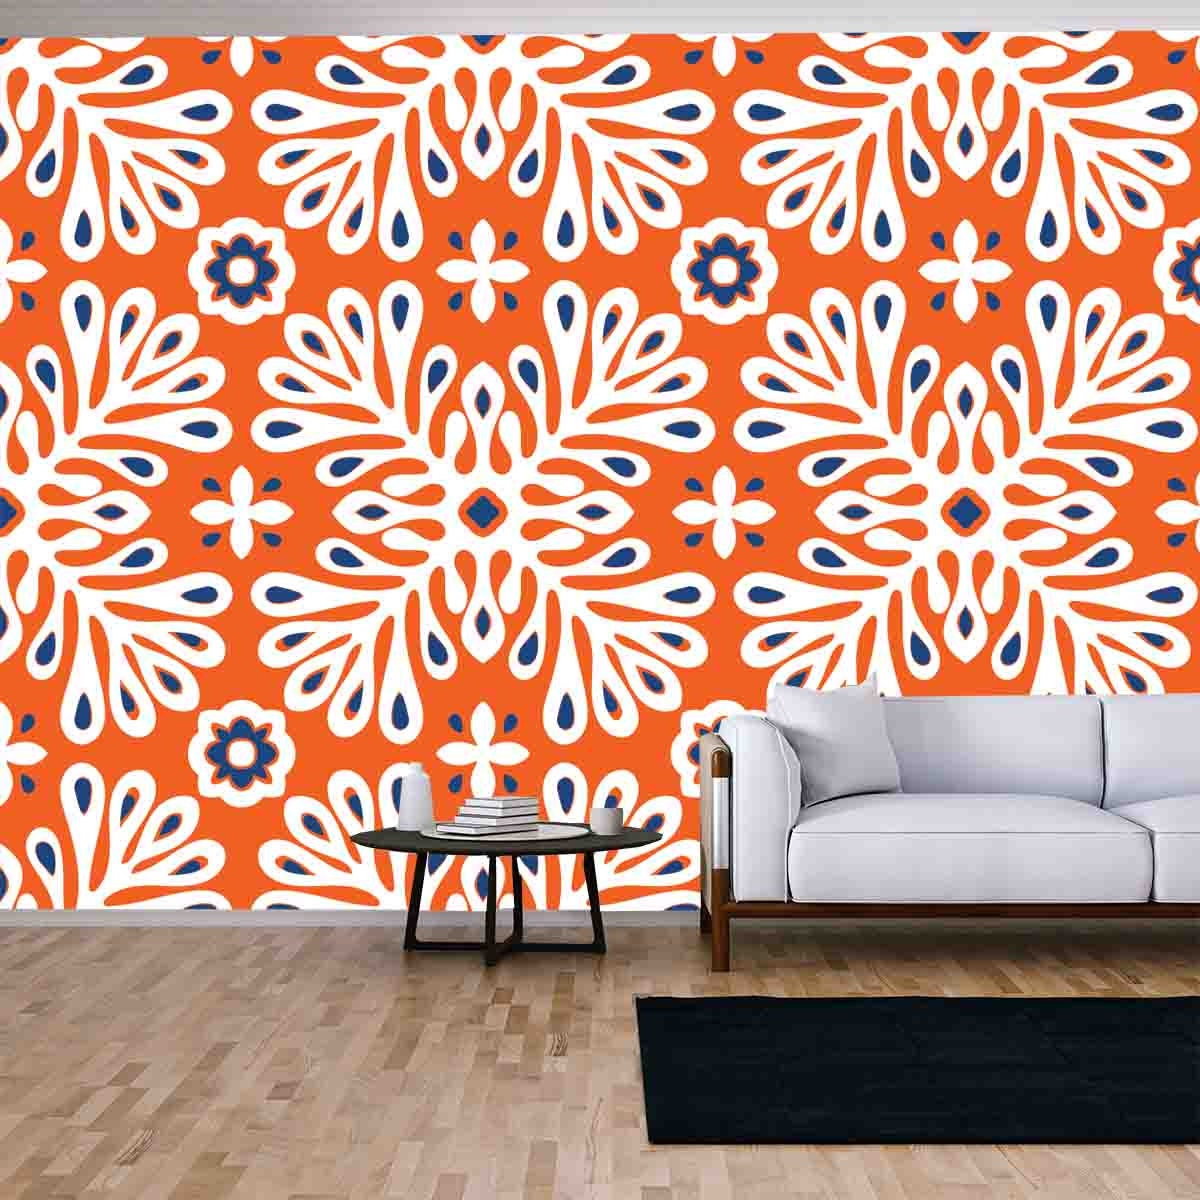 Traditional Vector Ornament in Scandinavian Style. Stylized Flowers and Plants Wallpaper Living Room Mural